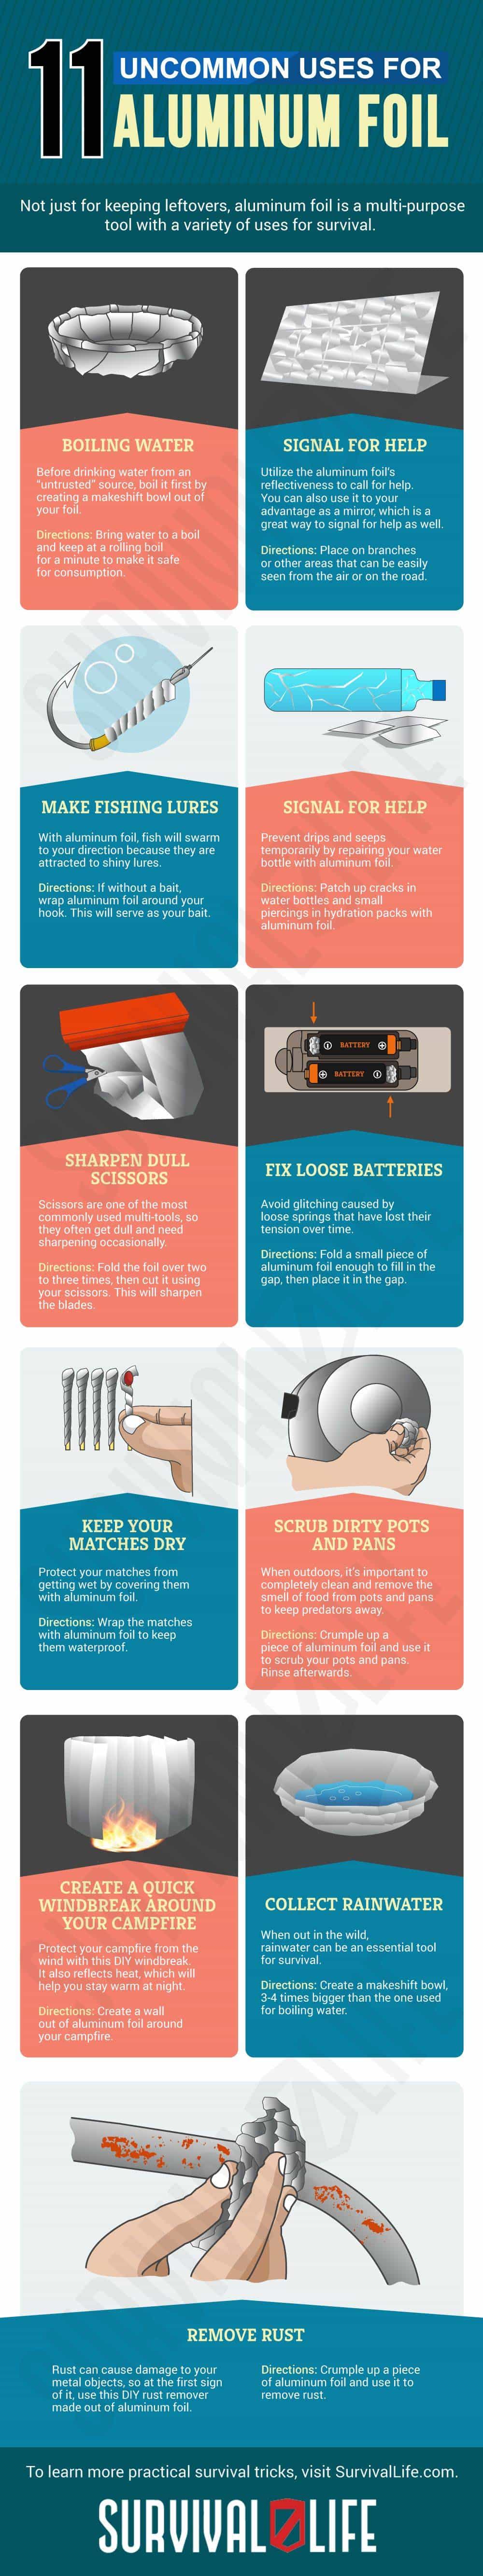 Infographic | Uncommon Uses For Aluminum Foil